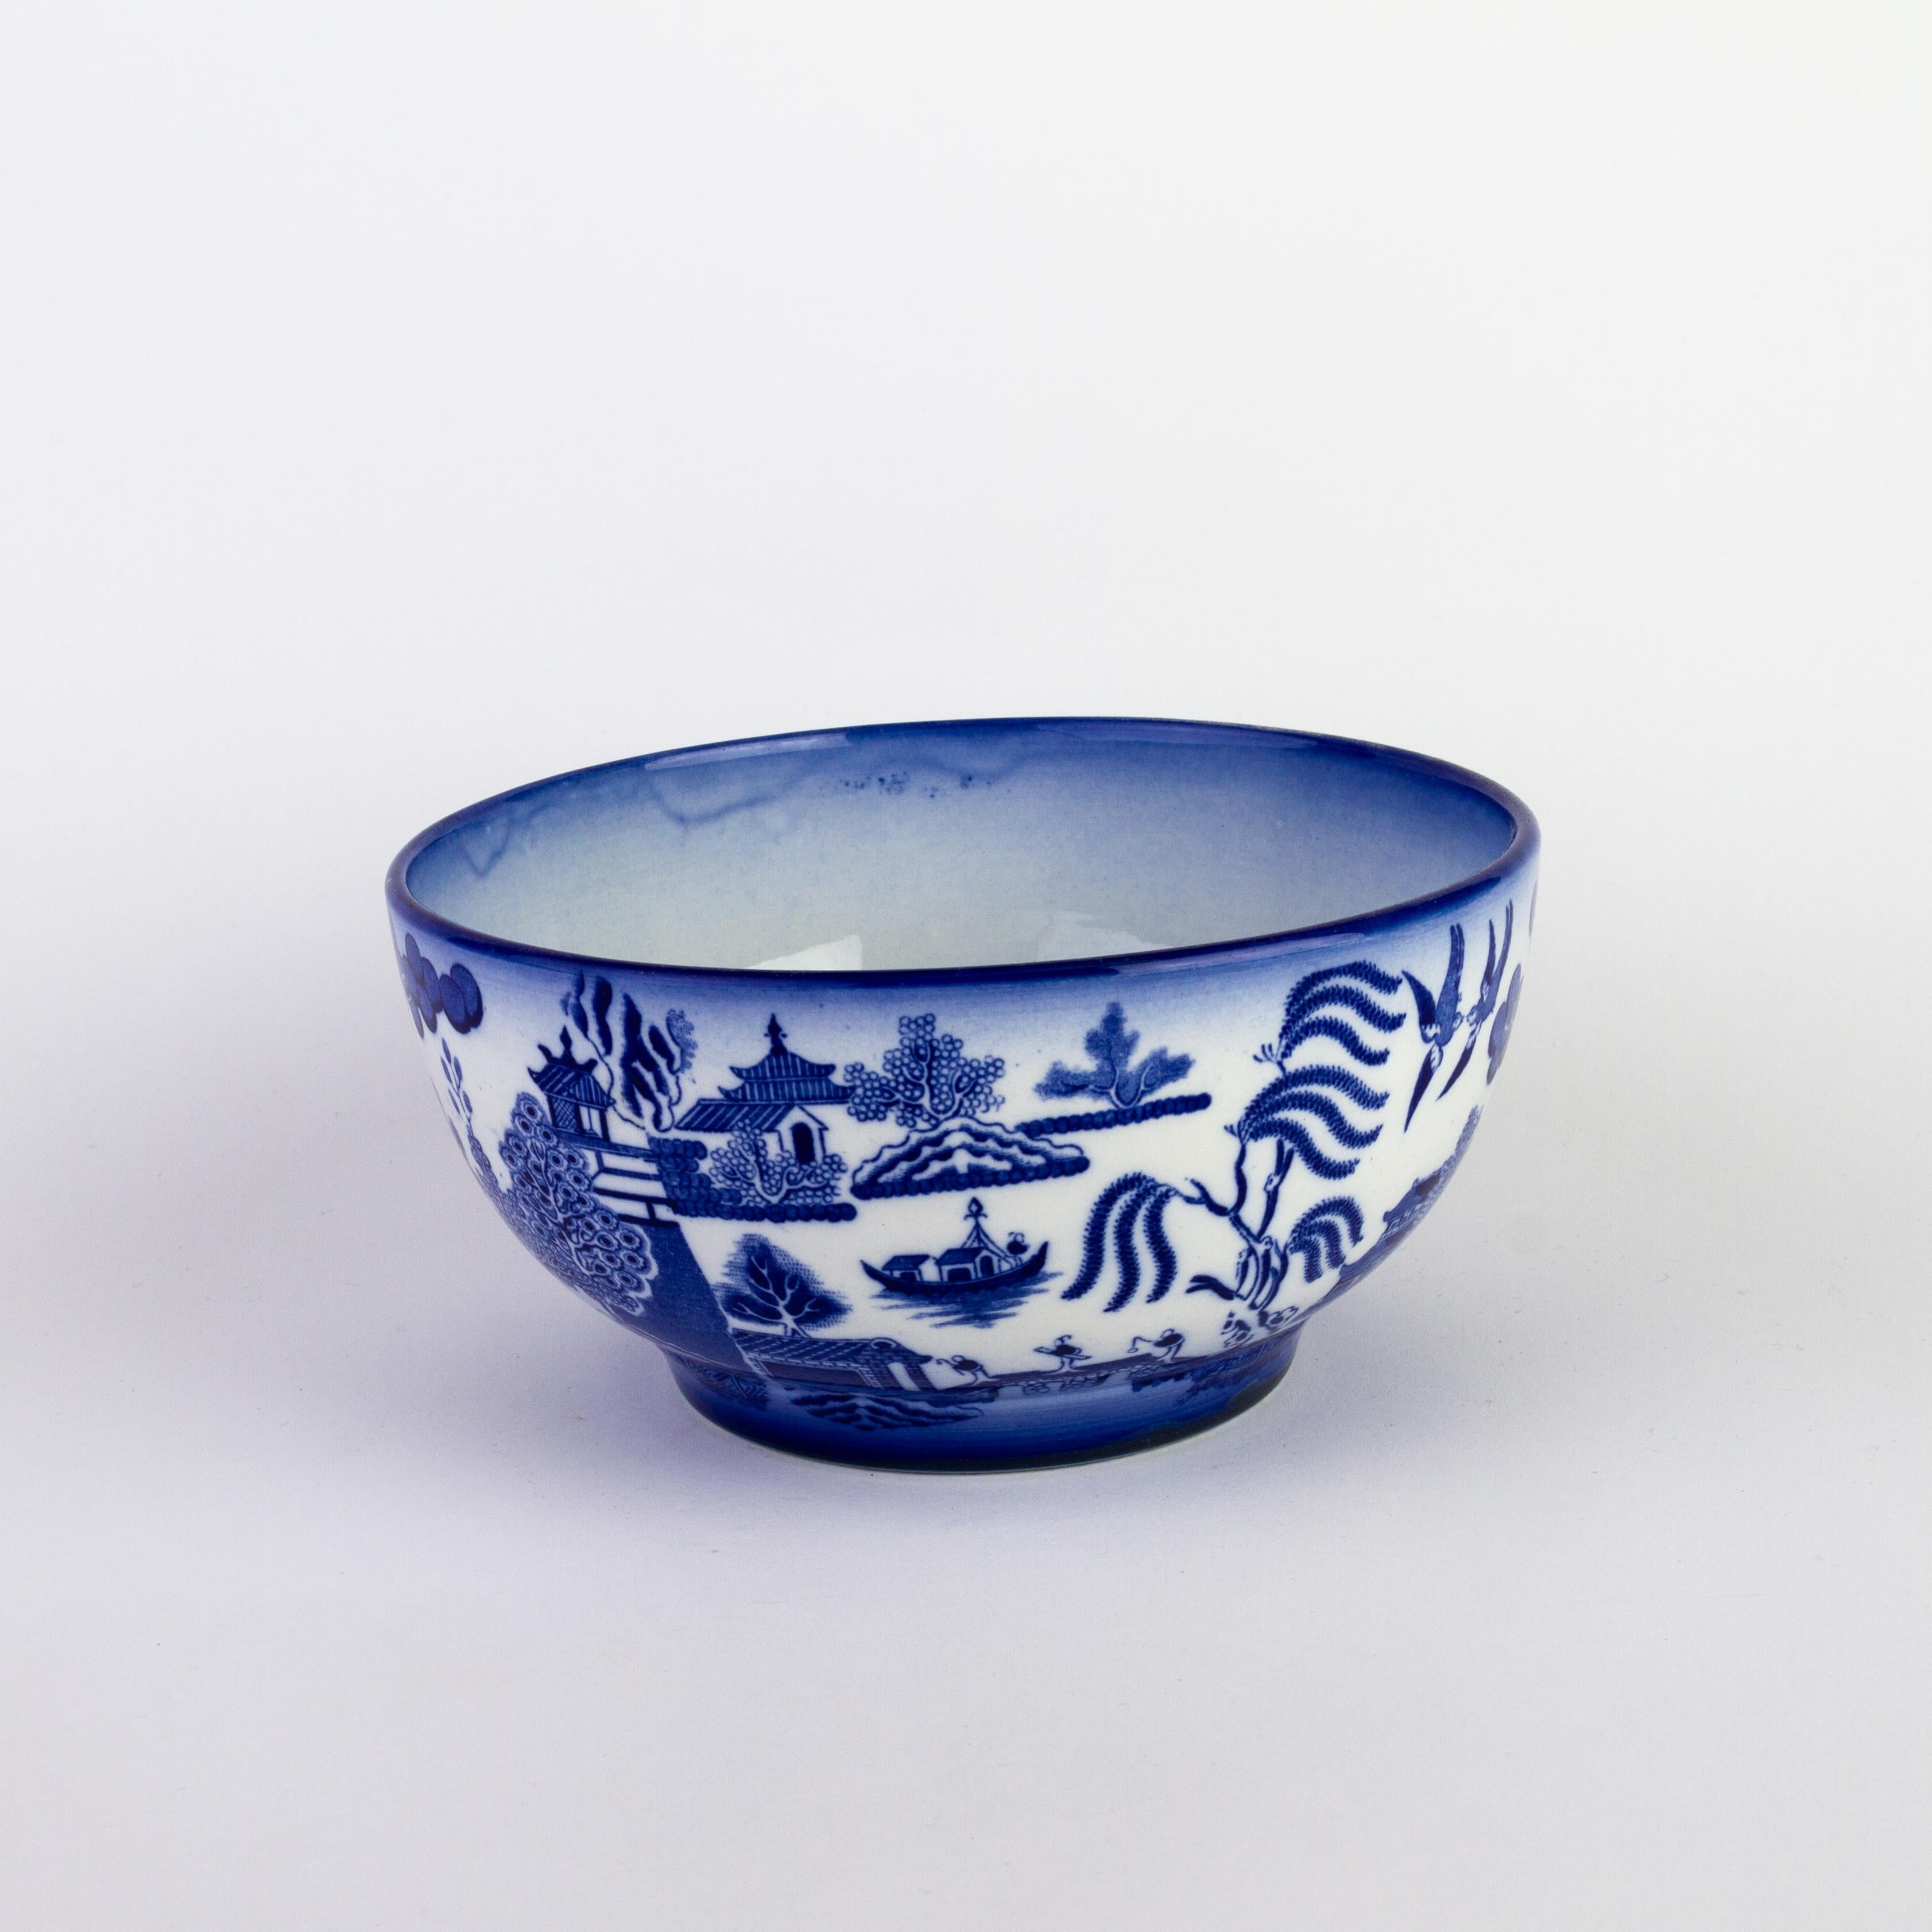 20th Century Chinese Willow Pattern Blue & White Porcelain Bowl